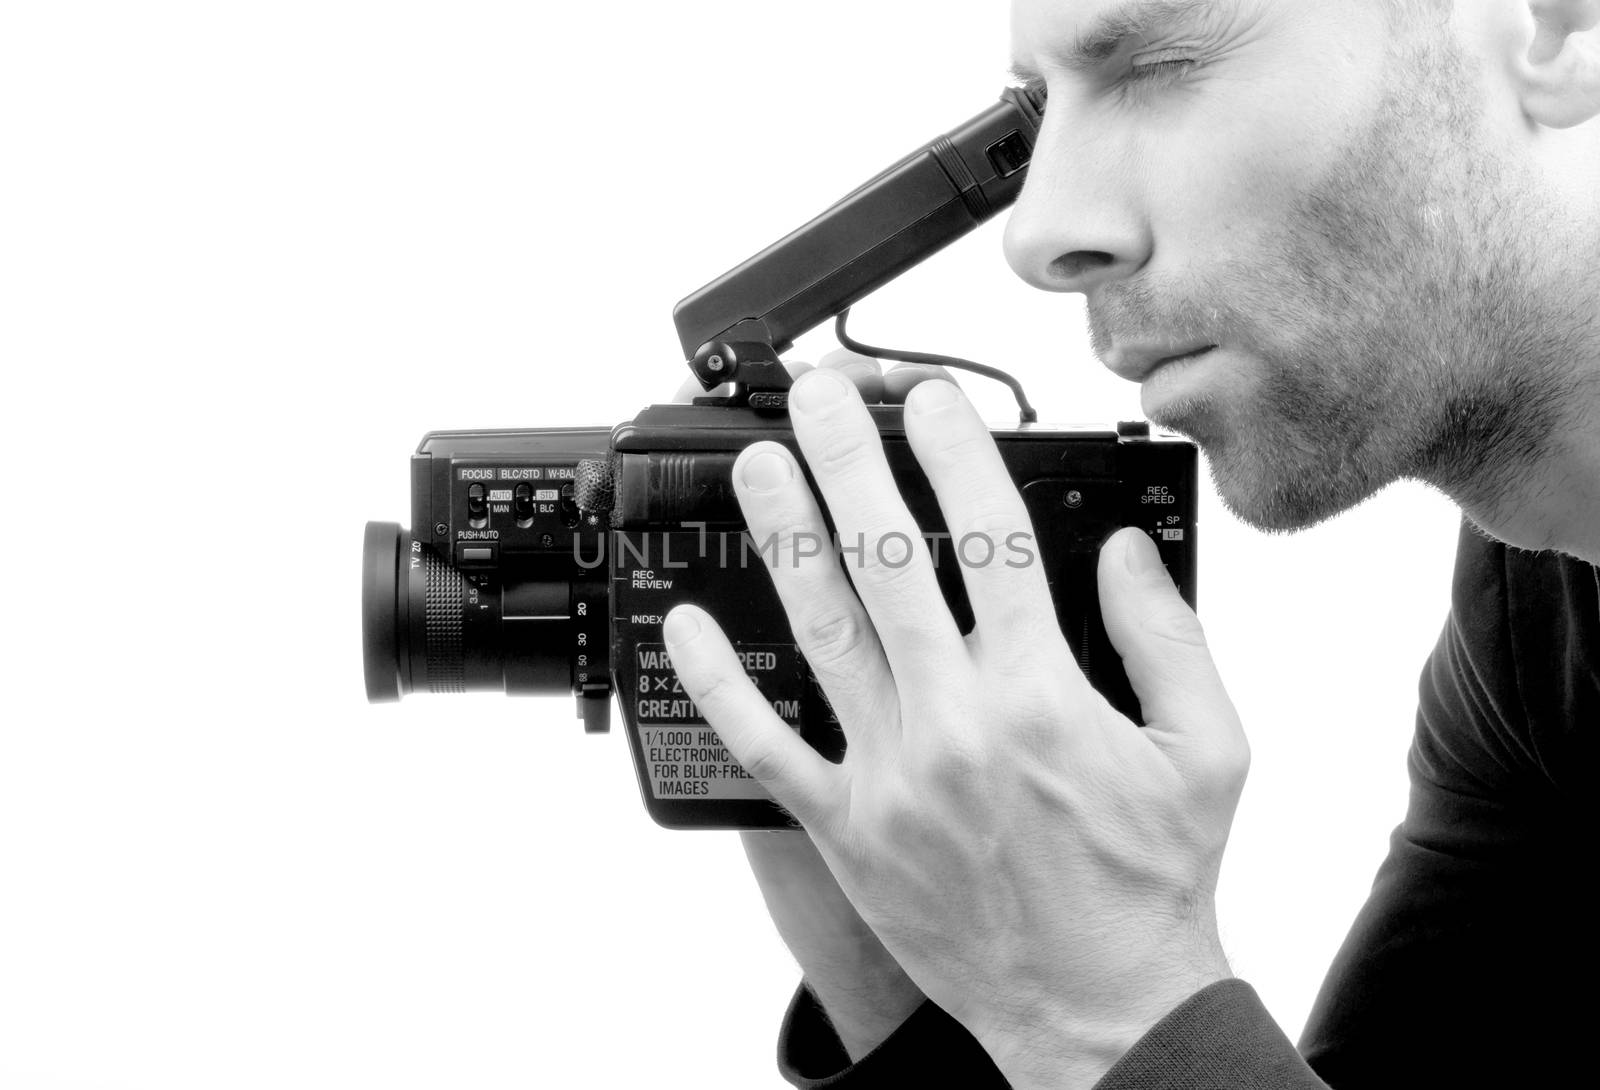 Analogue camcorder, isolated on a white background